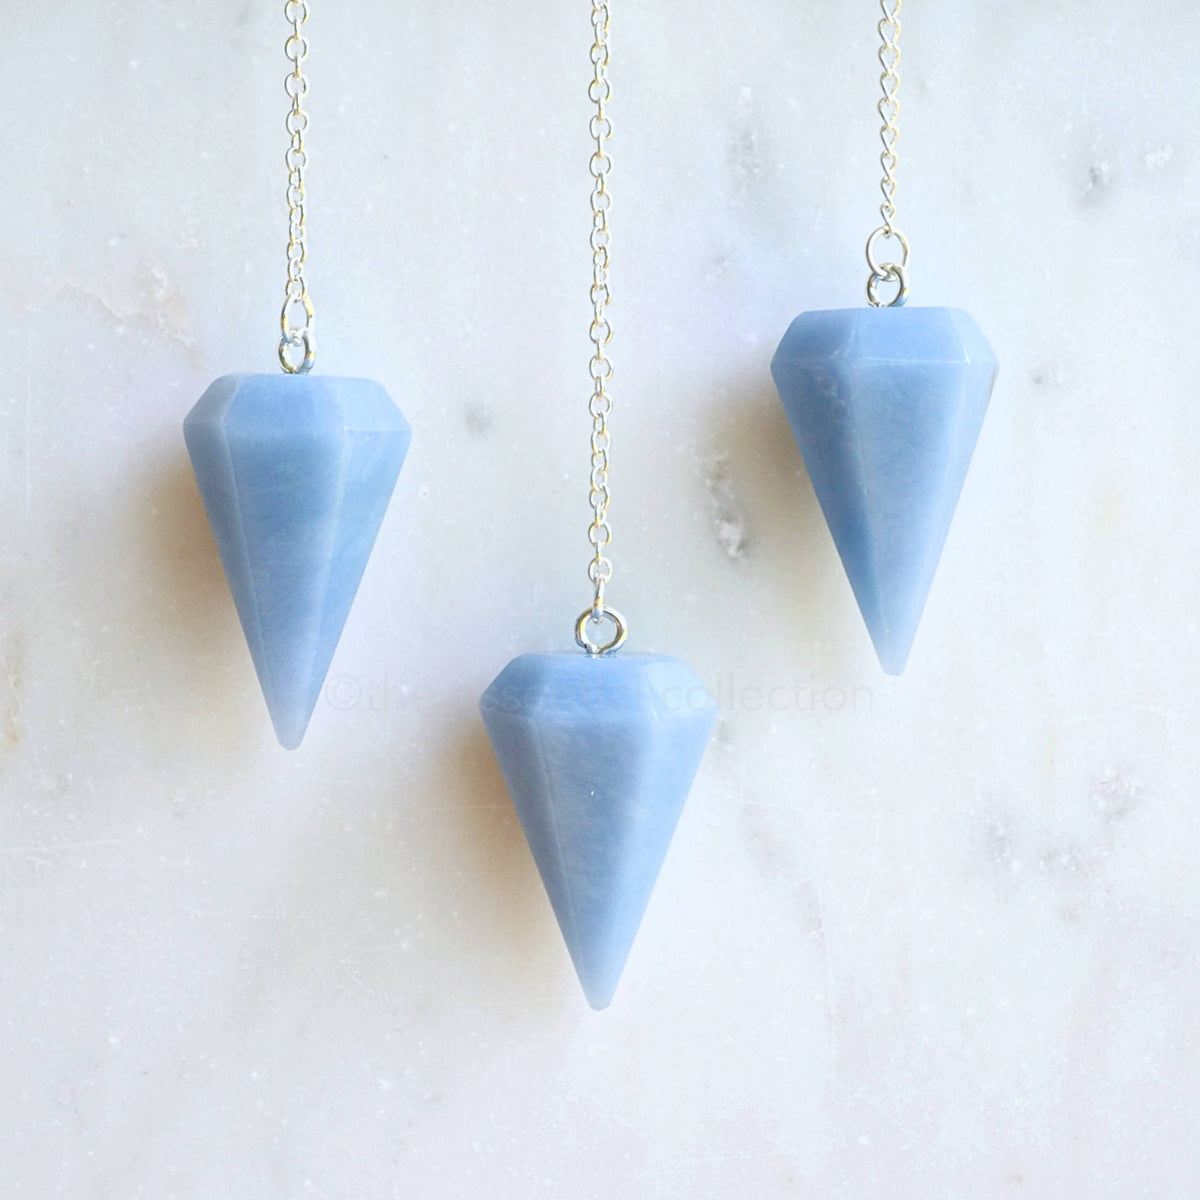 3 angelite crystal pendulums white marble background